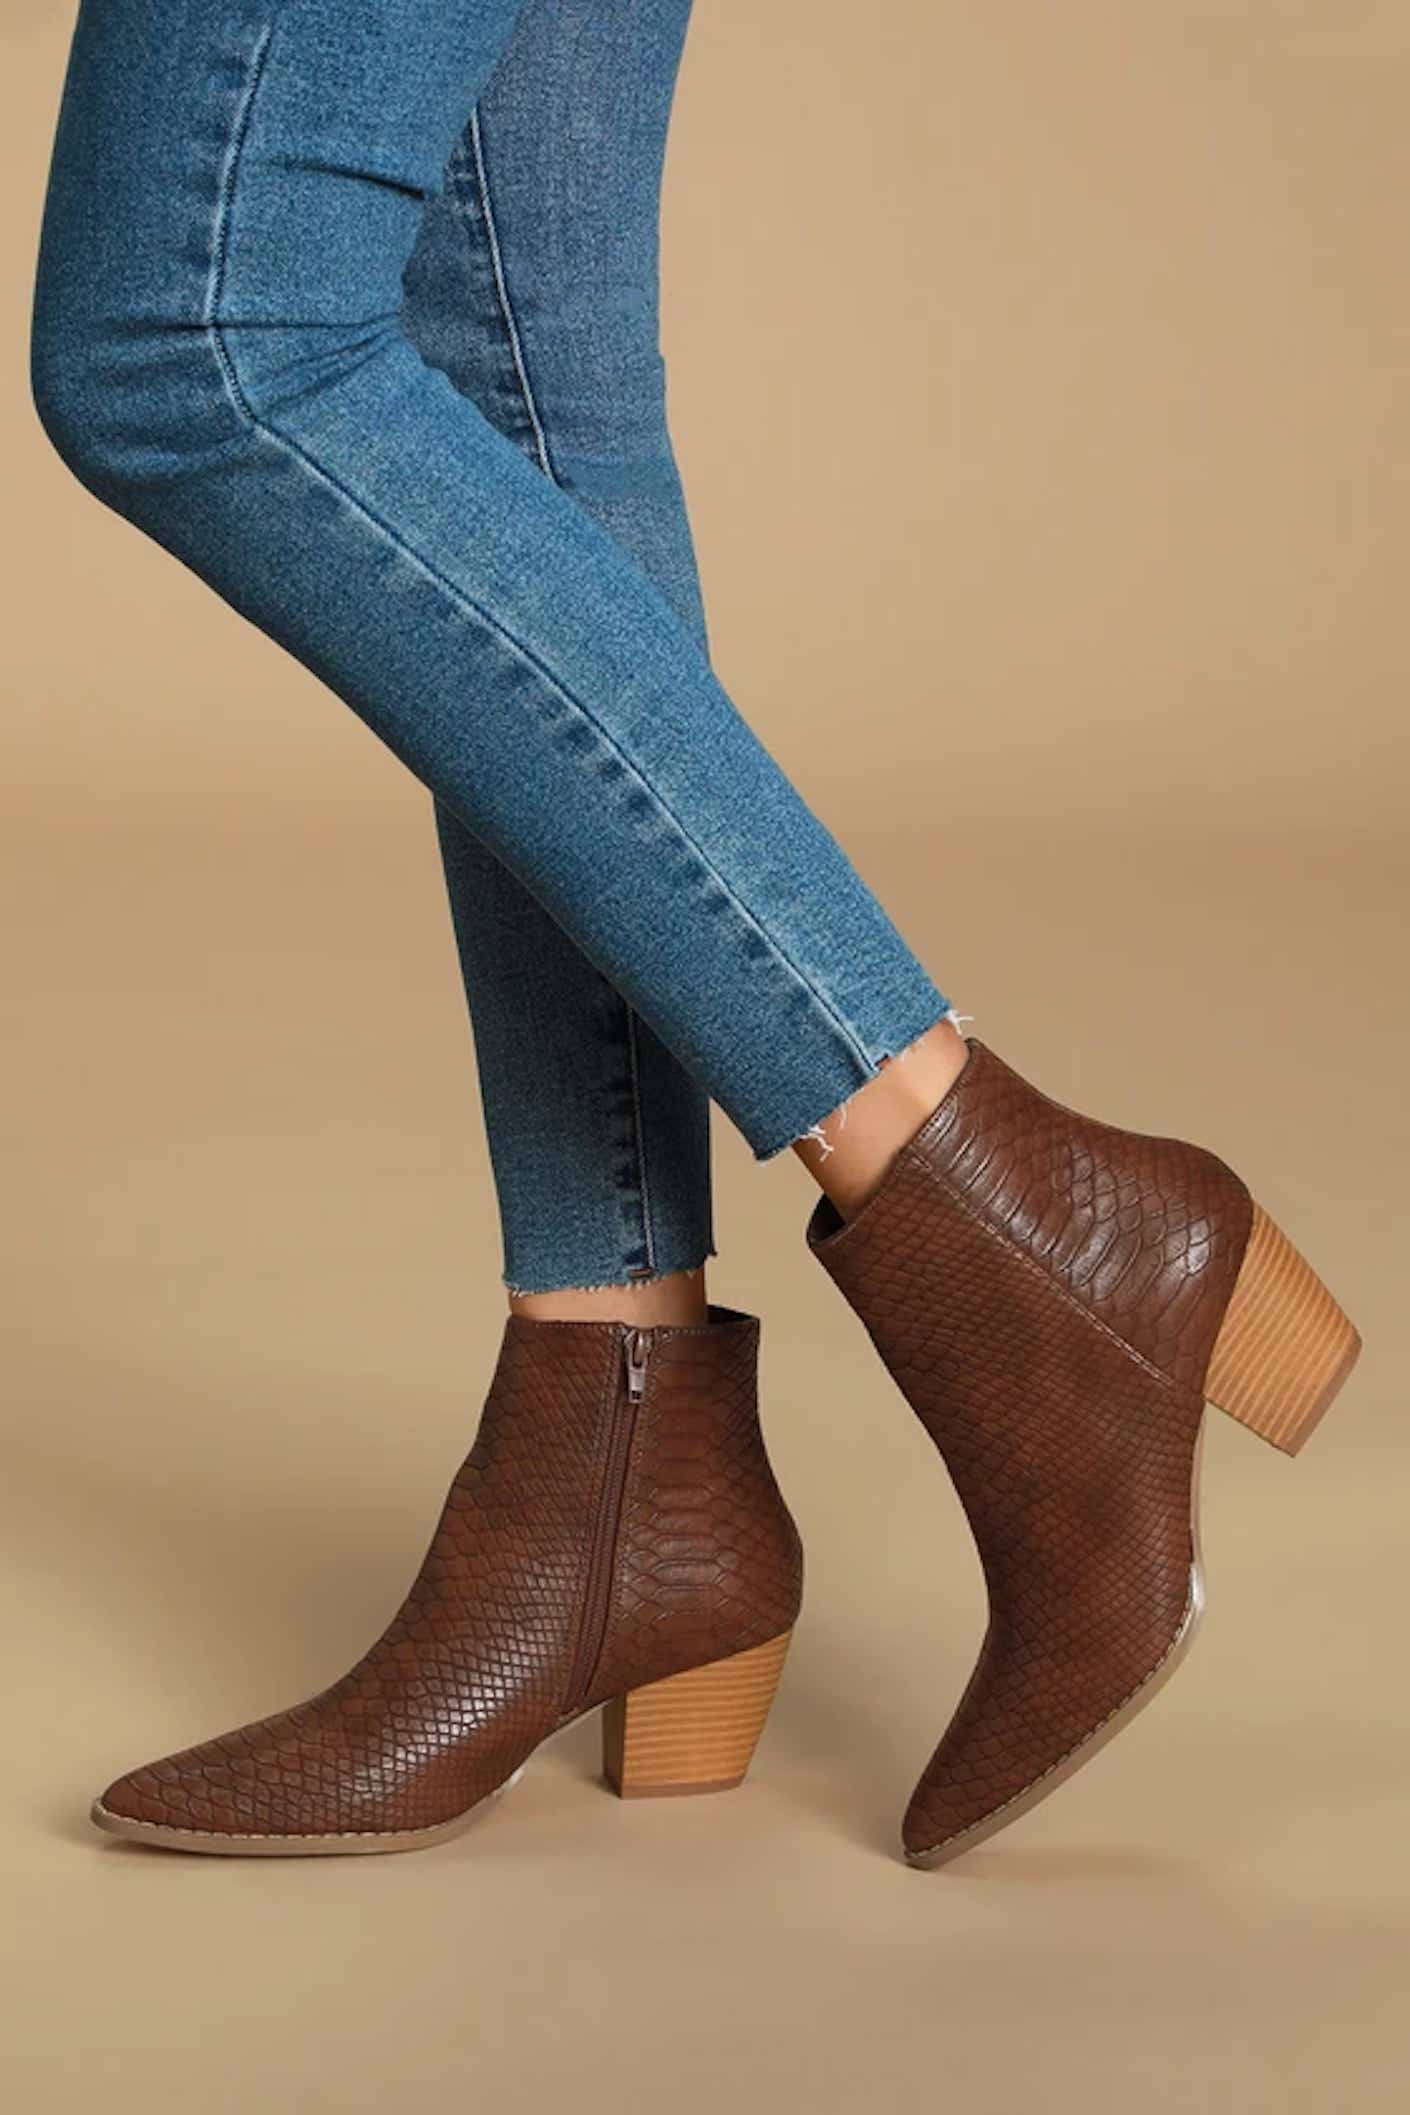 A person wearing jeans crosses their legs to show off dark brown snakeskin boots with a short, light brown heel.